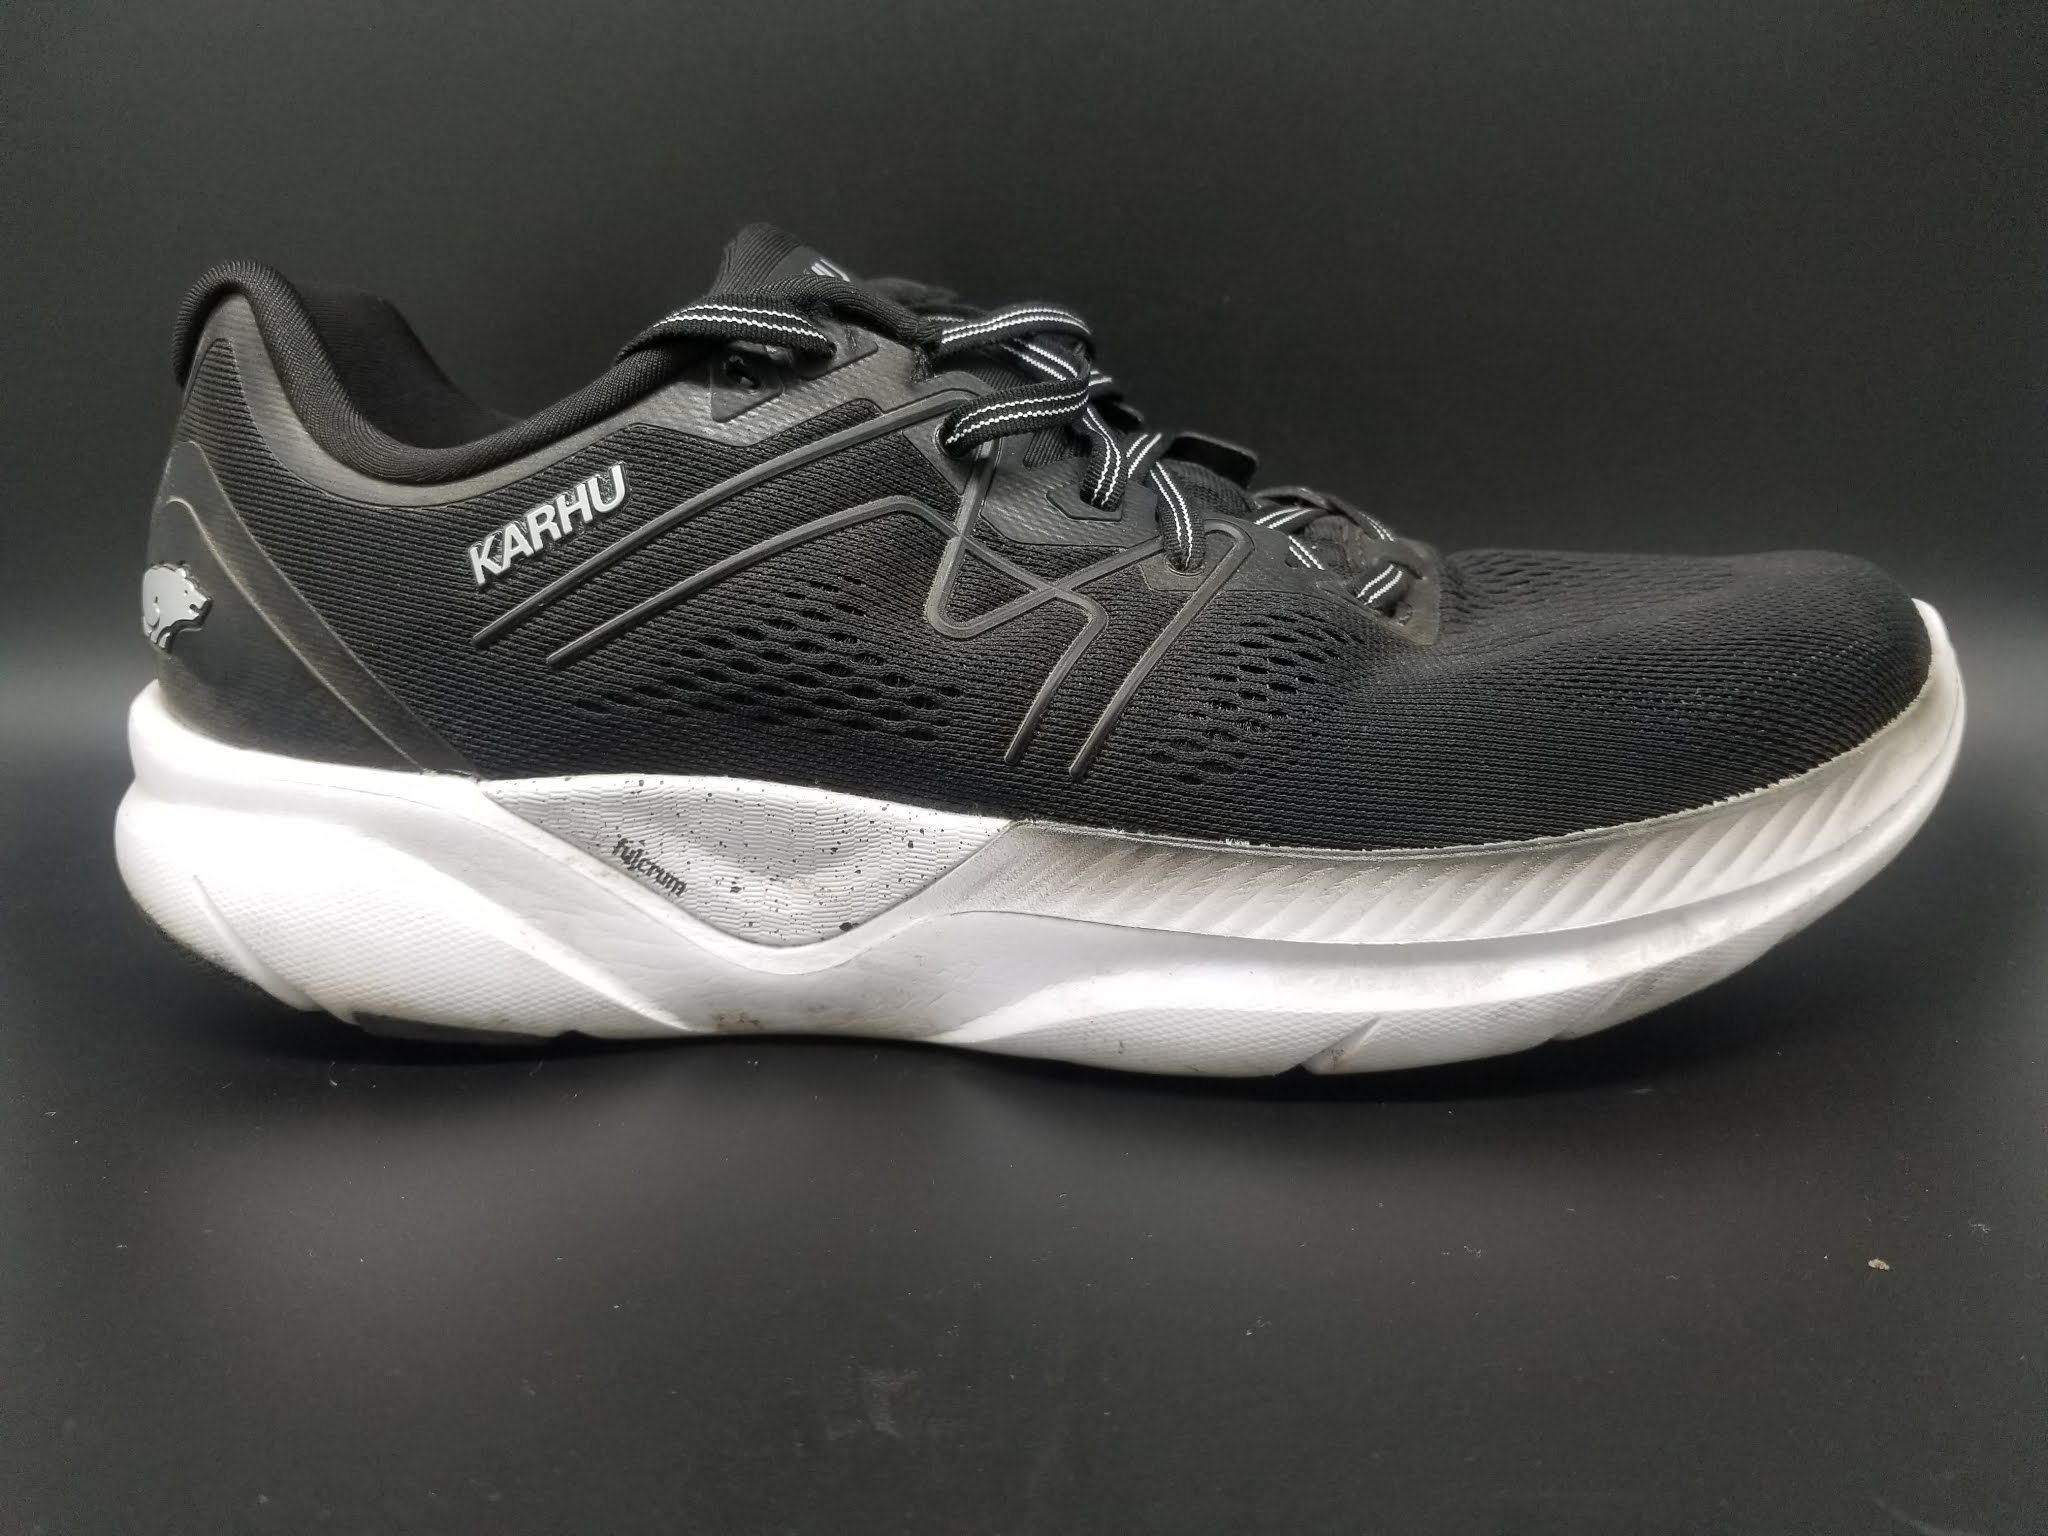 Karhu Fusion 2021 Review - DOCTORS OF RUNNING